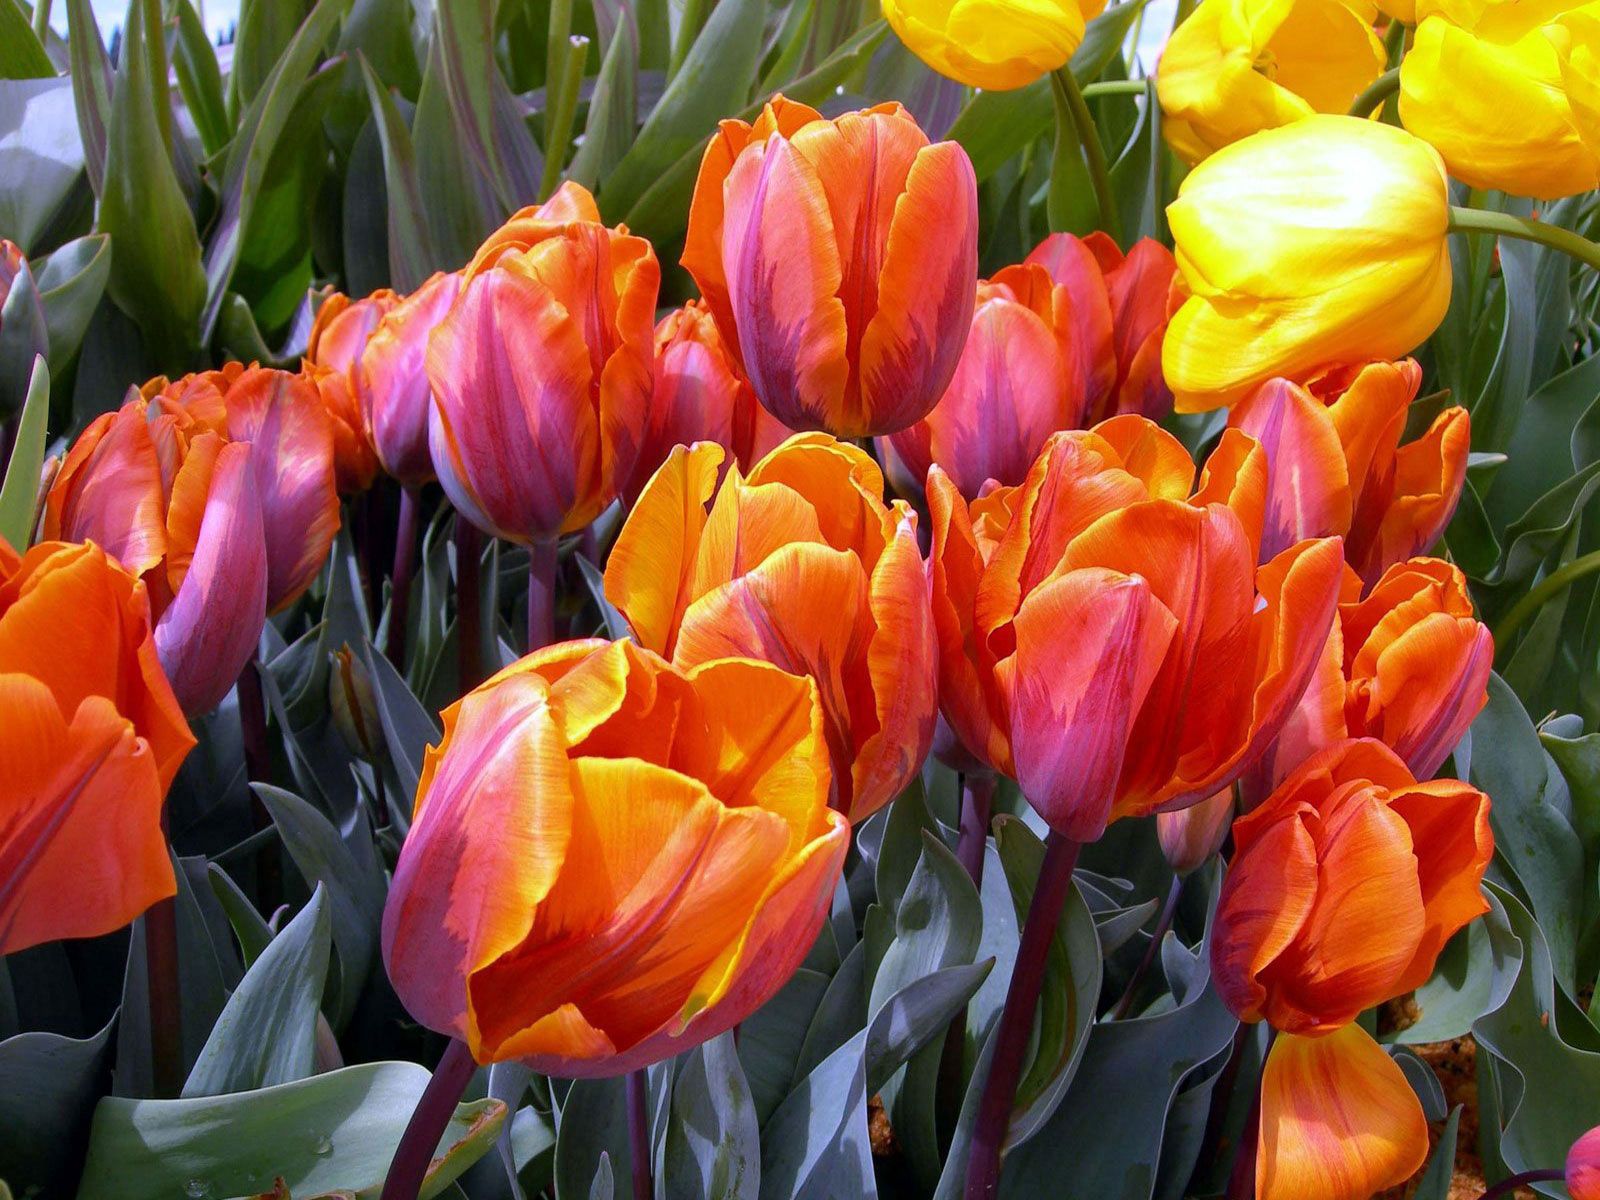 loose, flowers, tulips, disbanded, buds lock screen backgrounds